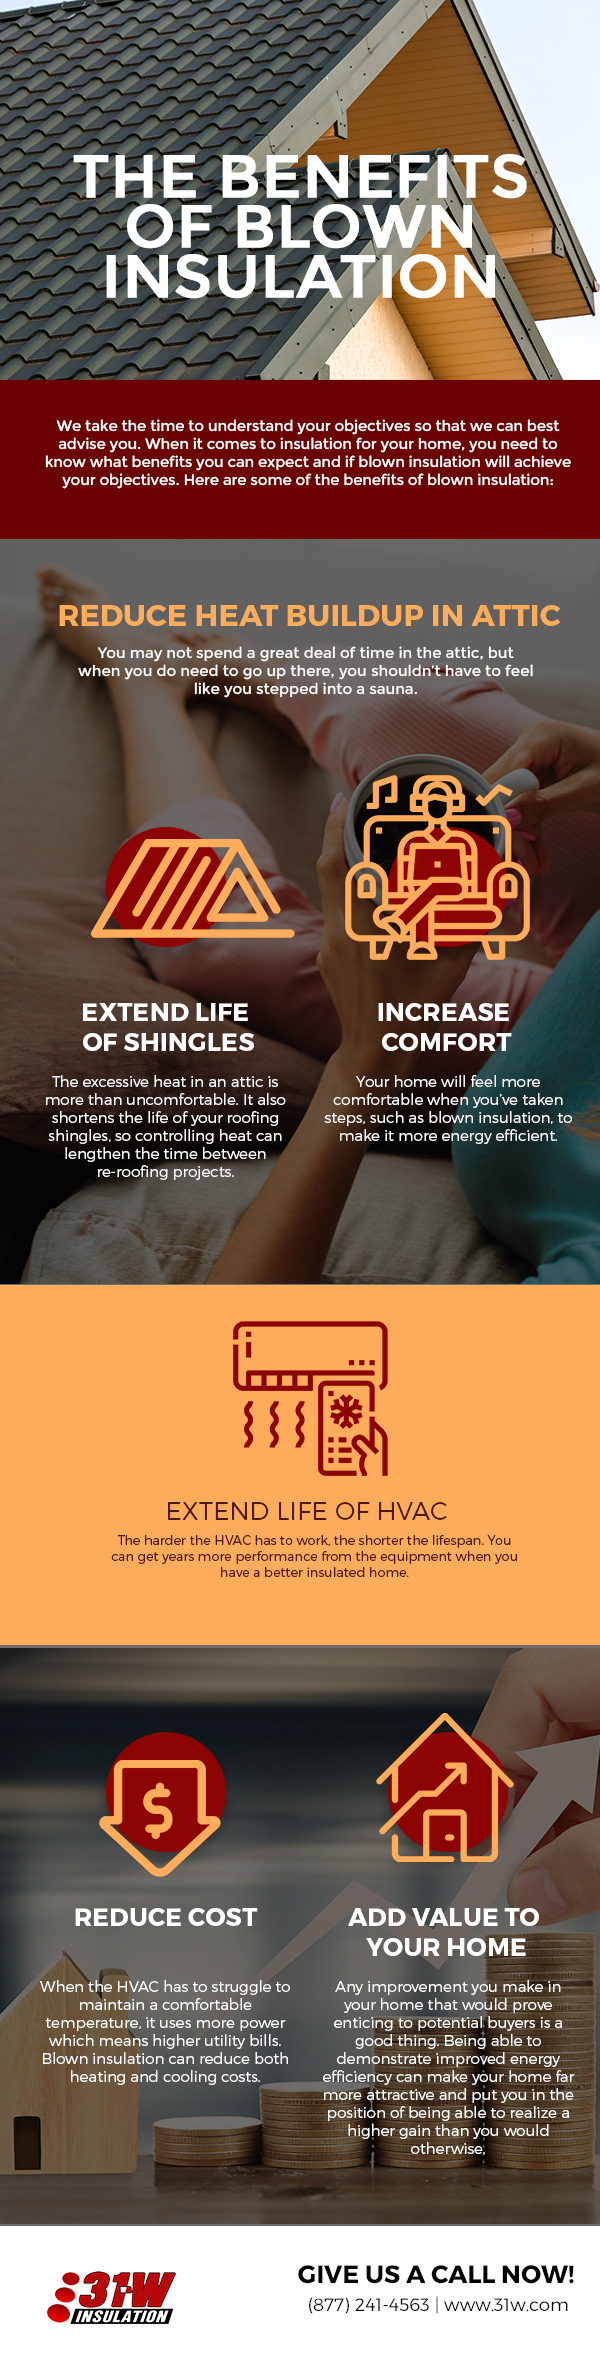 The Benefits of Blown Insulation [infographic]